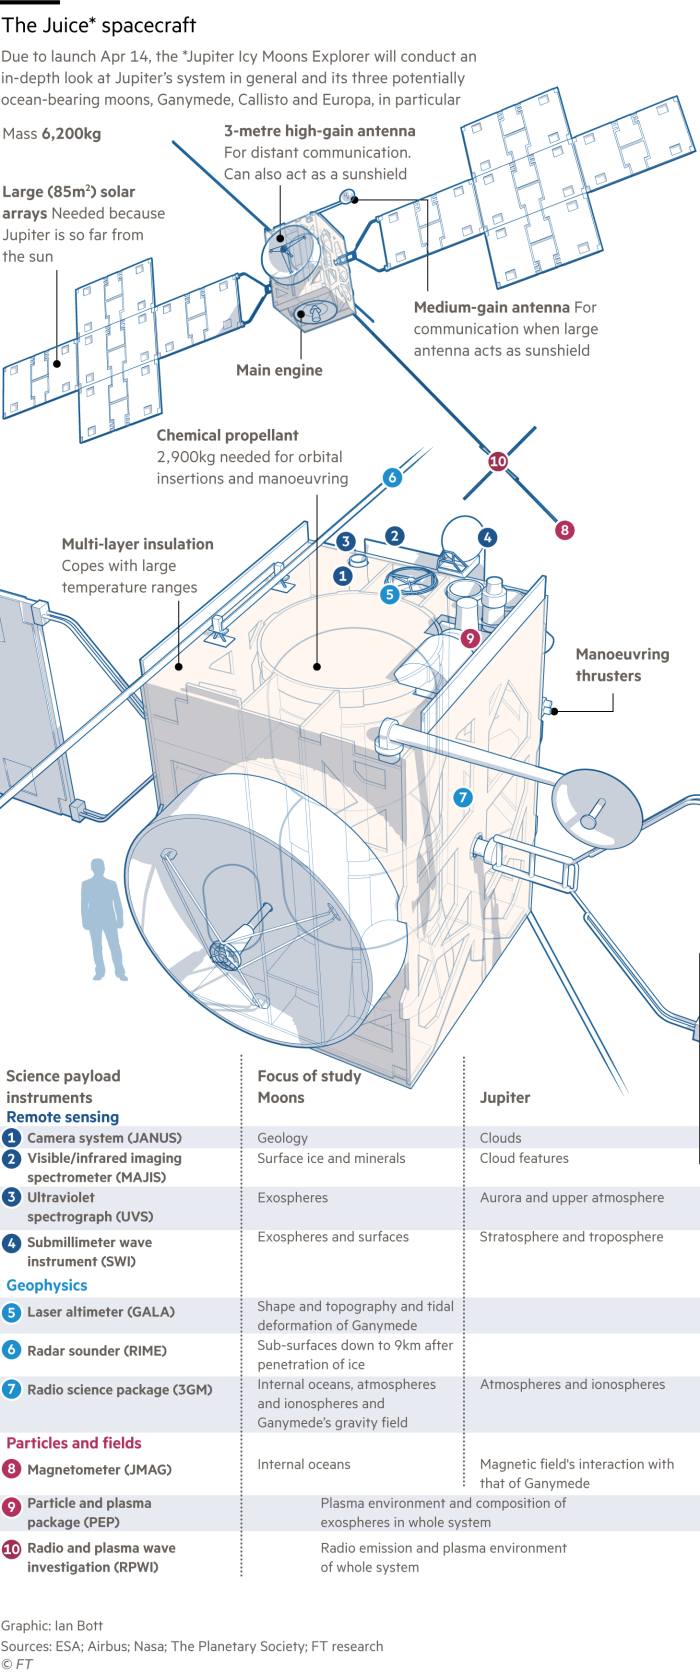 Diagram of the ESA Juice spacecraft and its instruments